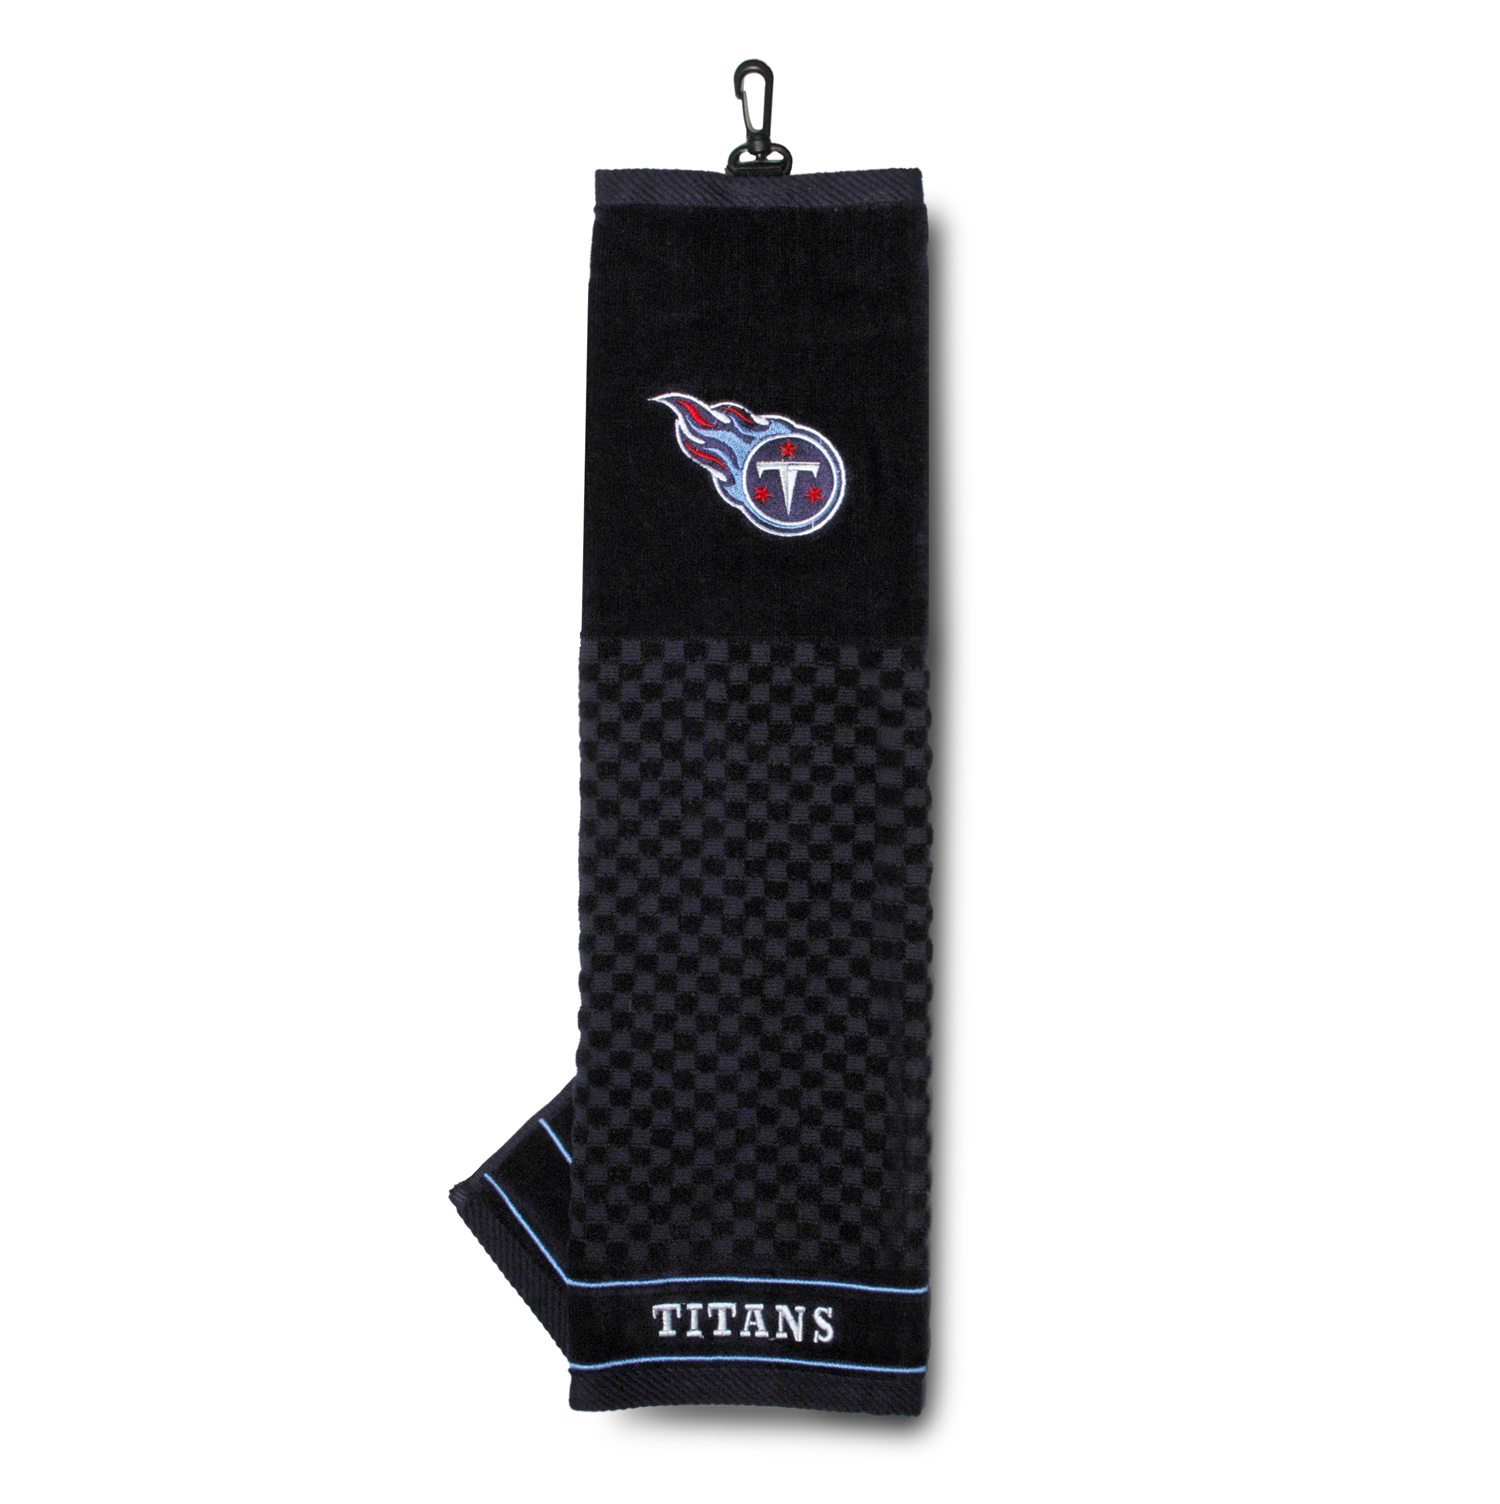 Tennessee Titans Embroidered Towel